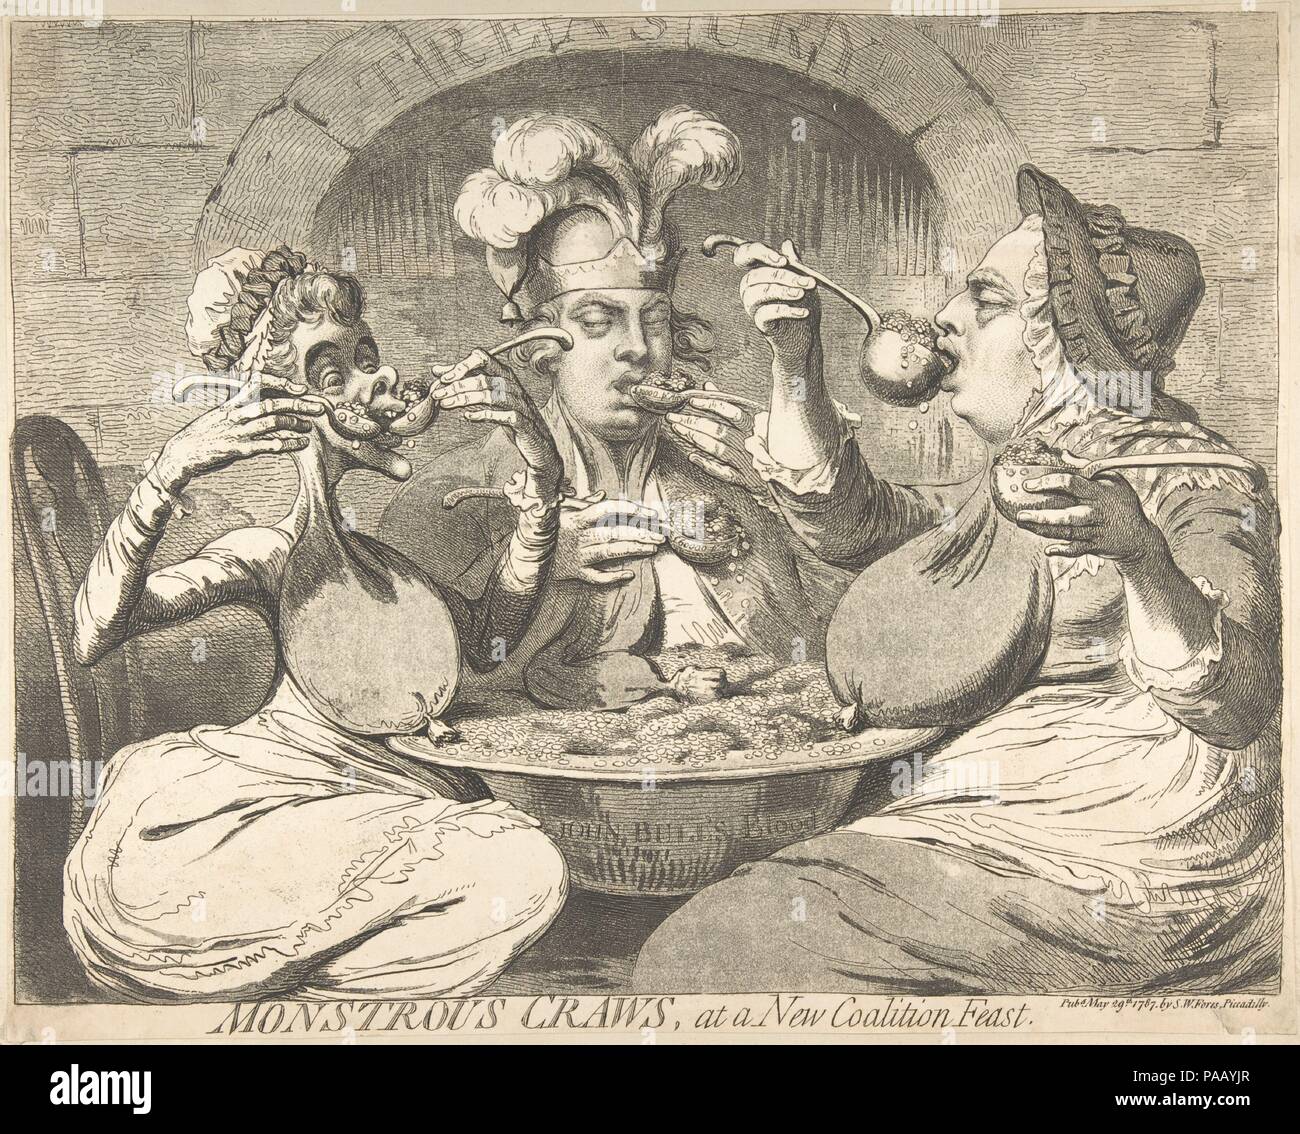 Monstrous Craws at a New Coalition Feast. Artist: James Gillray (British, Chelsea 1756-1815 London). Dimensions: sheet: 14 5/8 x 18 7/16 in. (37.2 x 46.9 cm). Publisher: Samuel William Fores (British, 1761-1838). Date: May 29, 1787.  Queen Charlotte, George, Prince of Wales, and King George III ravenously ladle guineas into their mouths from a bowl marked 'John Bull's Blood.' The money falls into bags attached to their necks - the monstrous craws of the title, a term normally applied to the crops of birds. Gillray used the imagery of gluttony to criticize the exorbitant demands on the public p Stock Photo